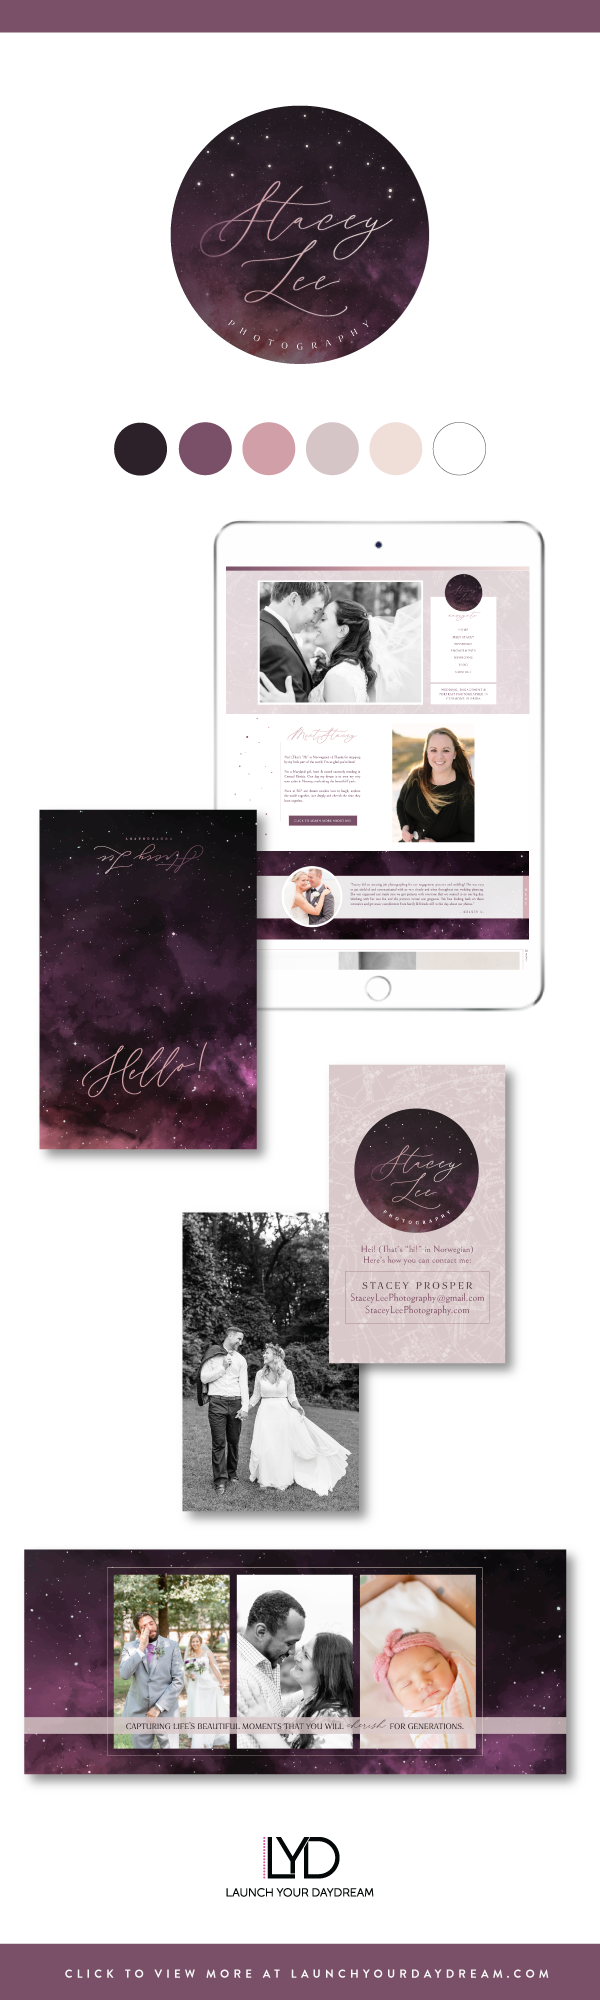 This is a romantic and colorful brand and Showit website design for Stacey Lee Photography